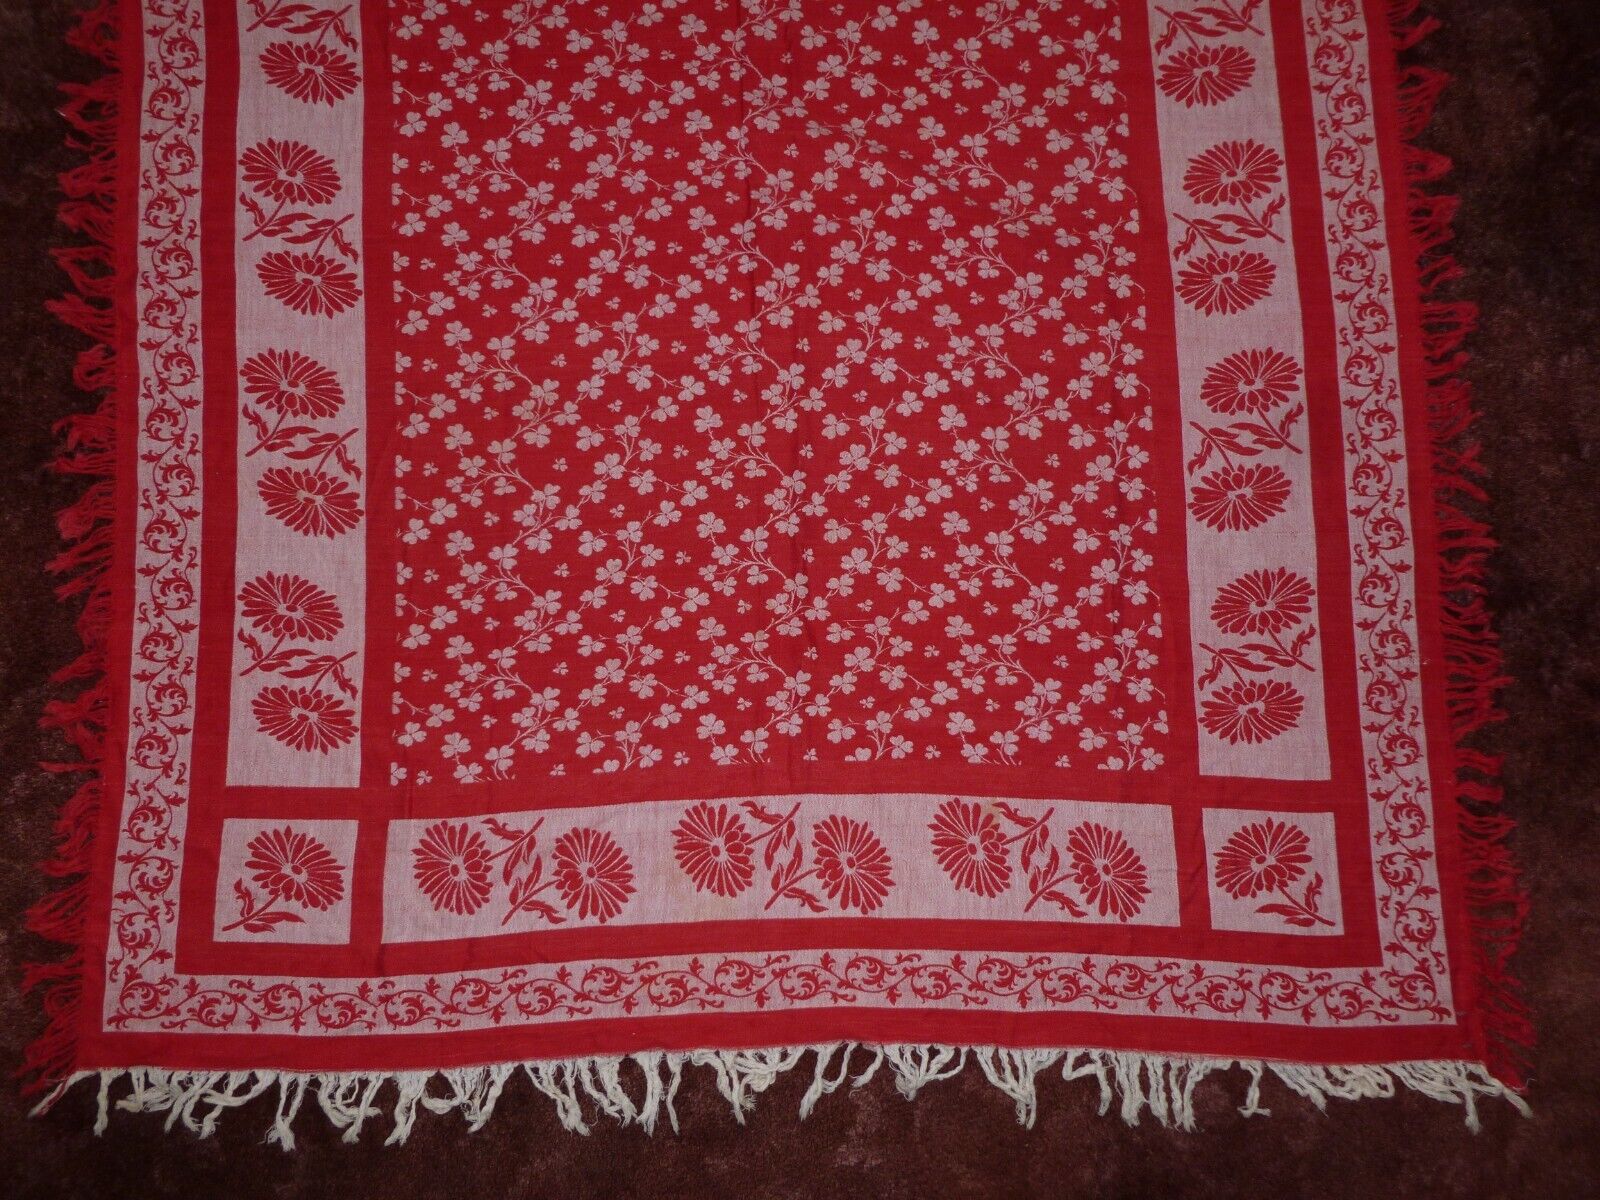 Exquisite Antique Woven Damask Tablecloth RED & WHITE Flowers 3 Leaf Clover Vtg